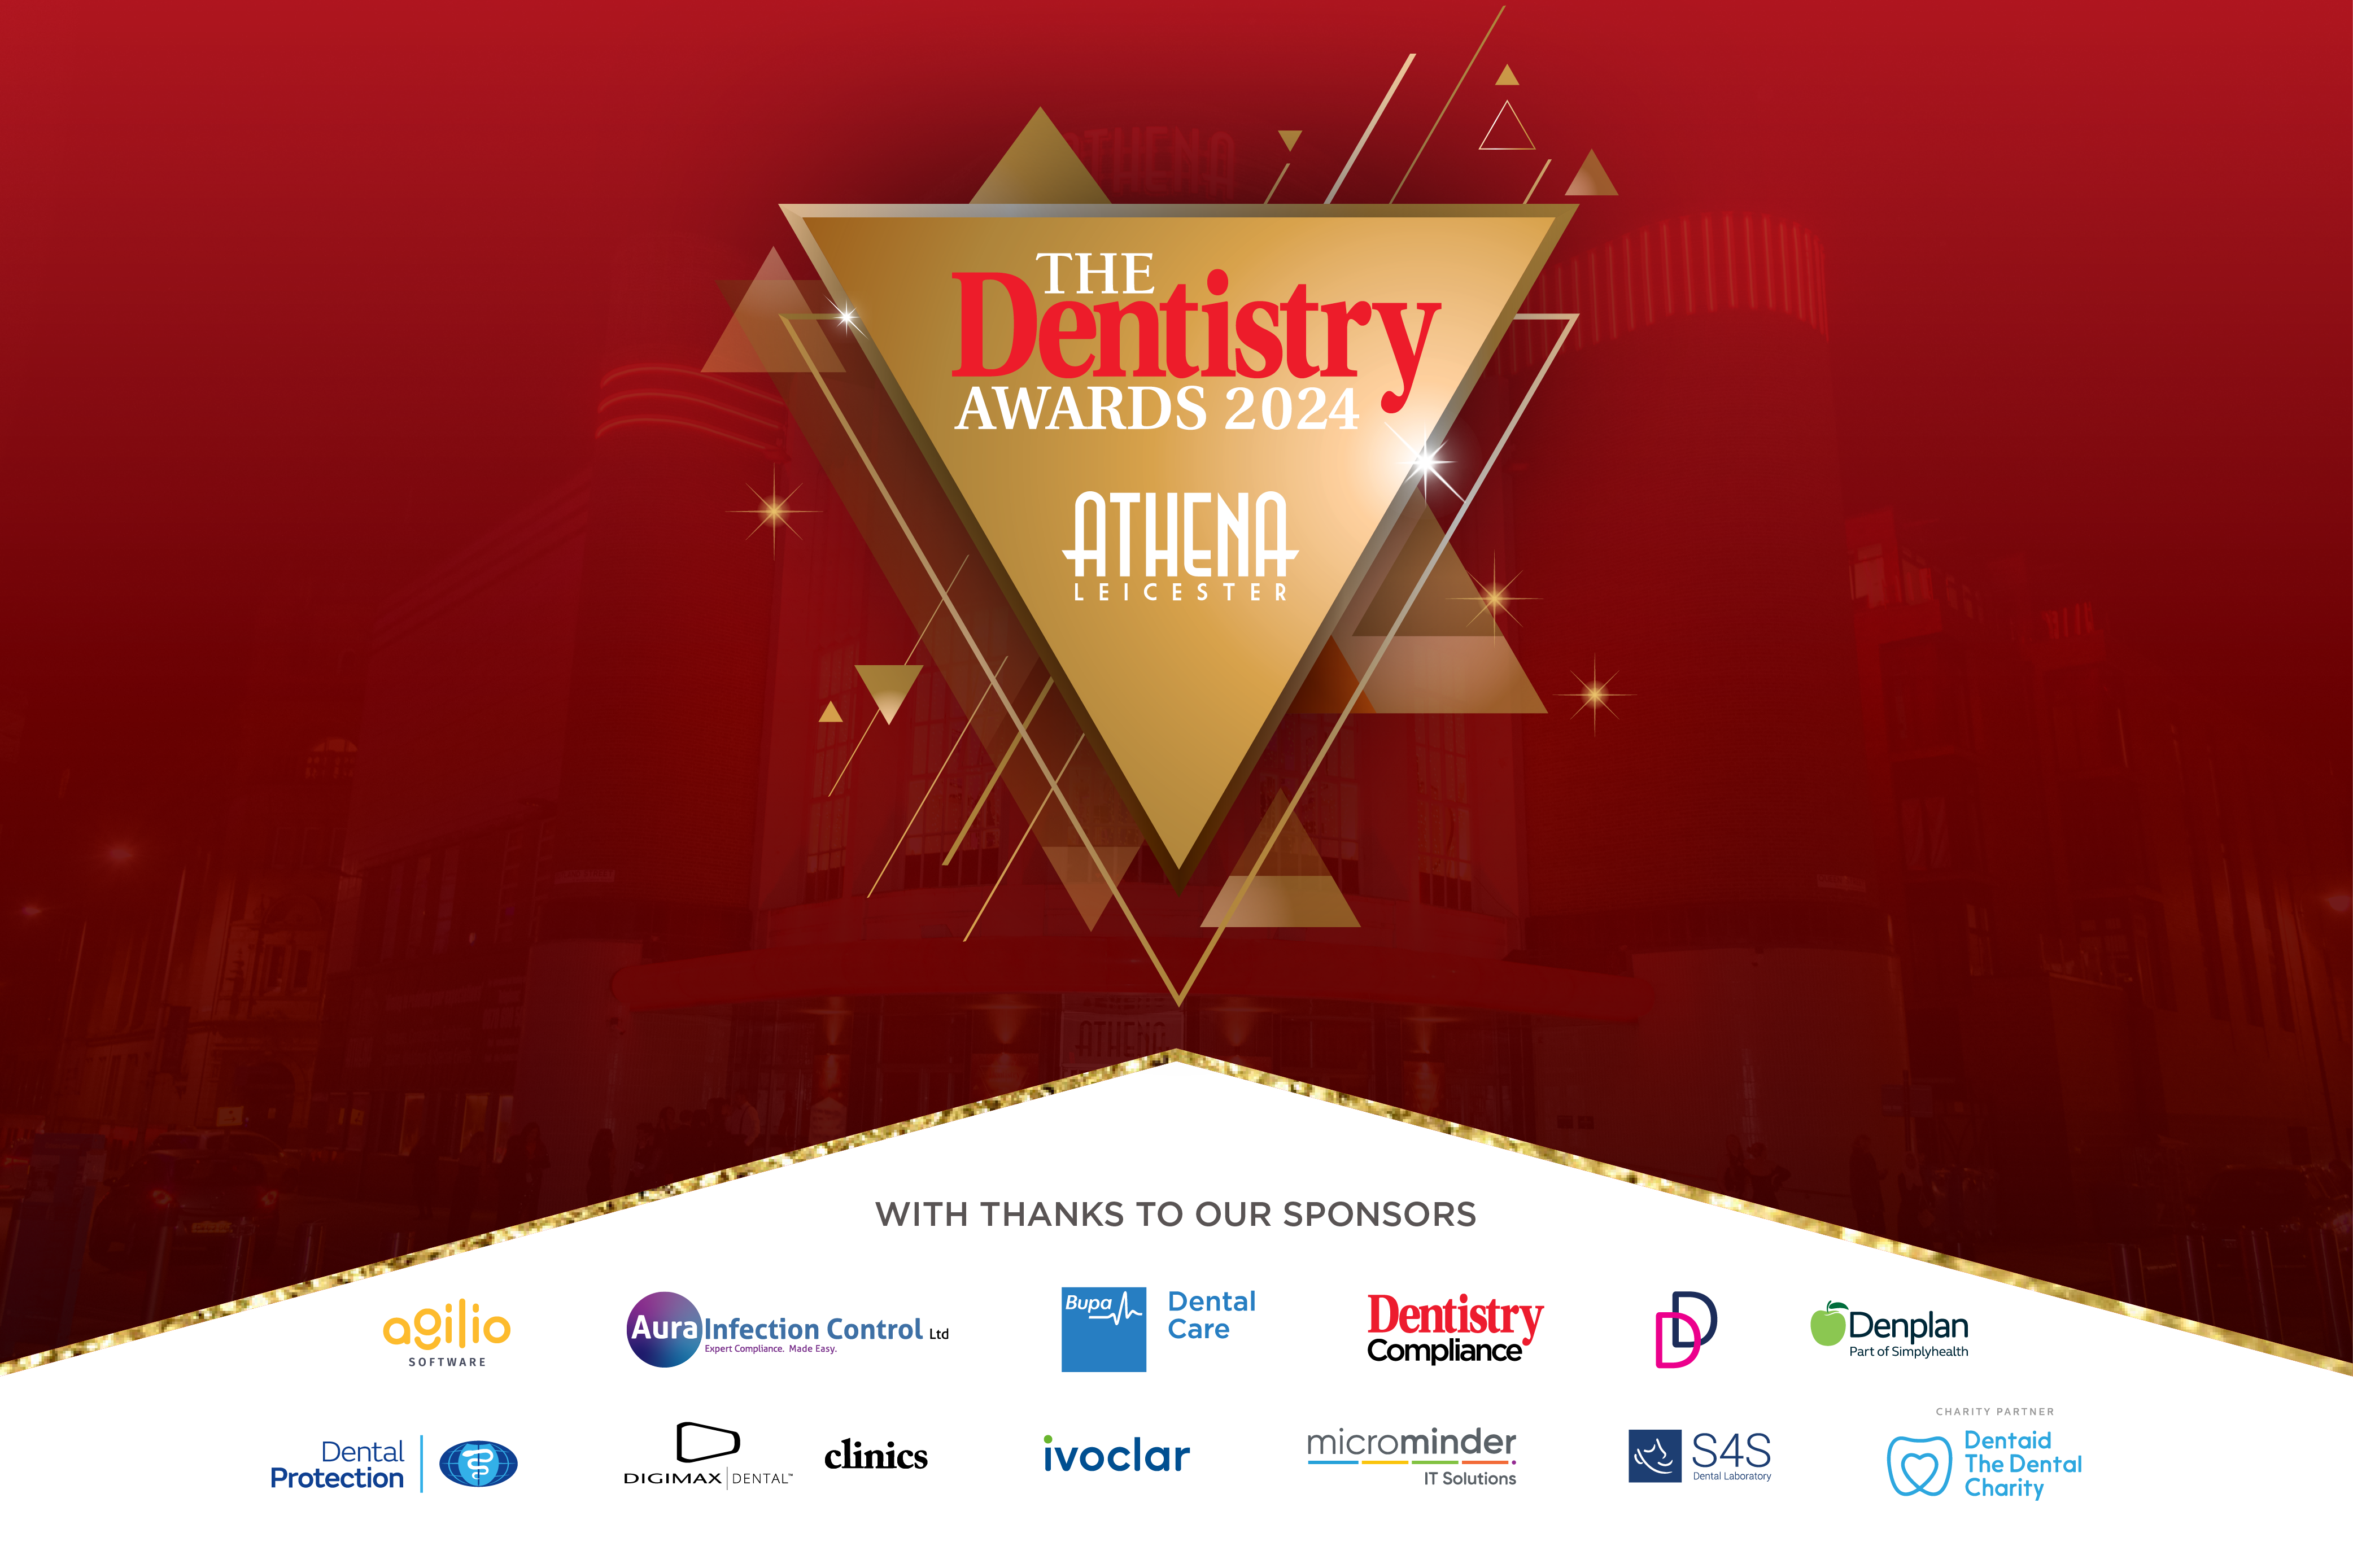 All FMC awards have officially launched for 2024, including the Dentistry Awards and Private Dentistry Awards. Register now to be the first to know when entries open.